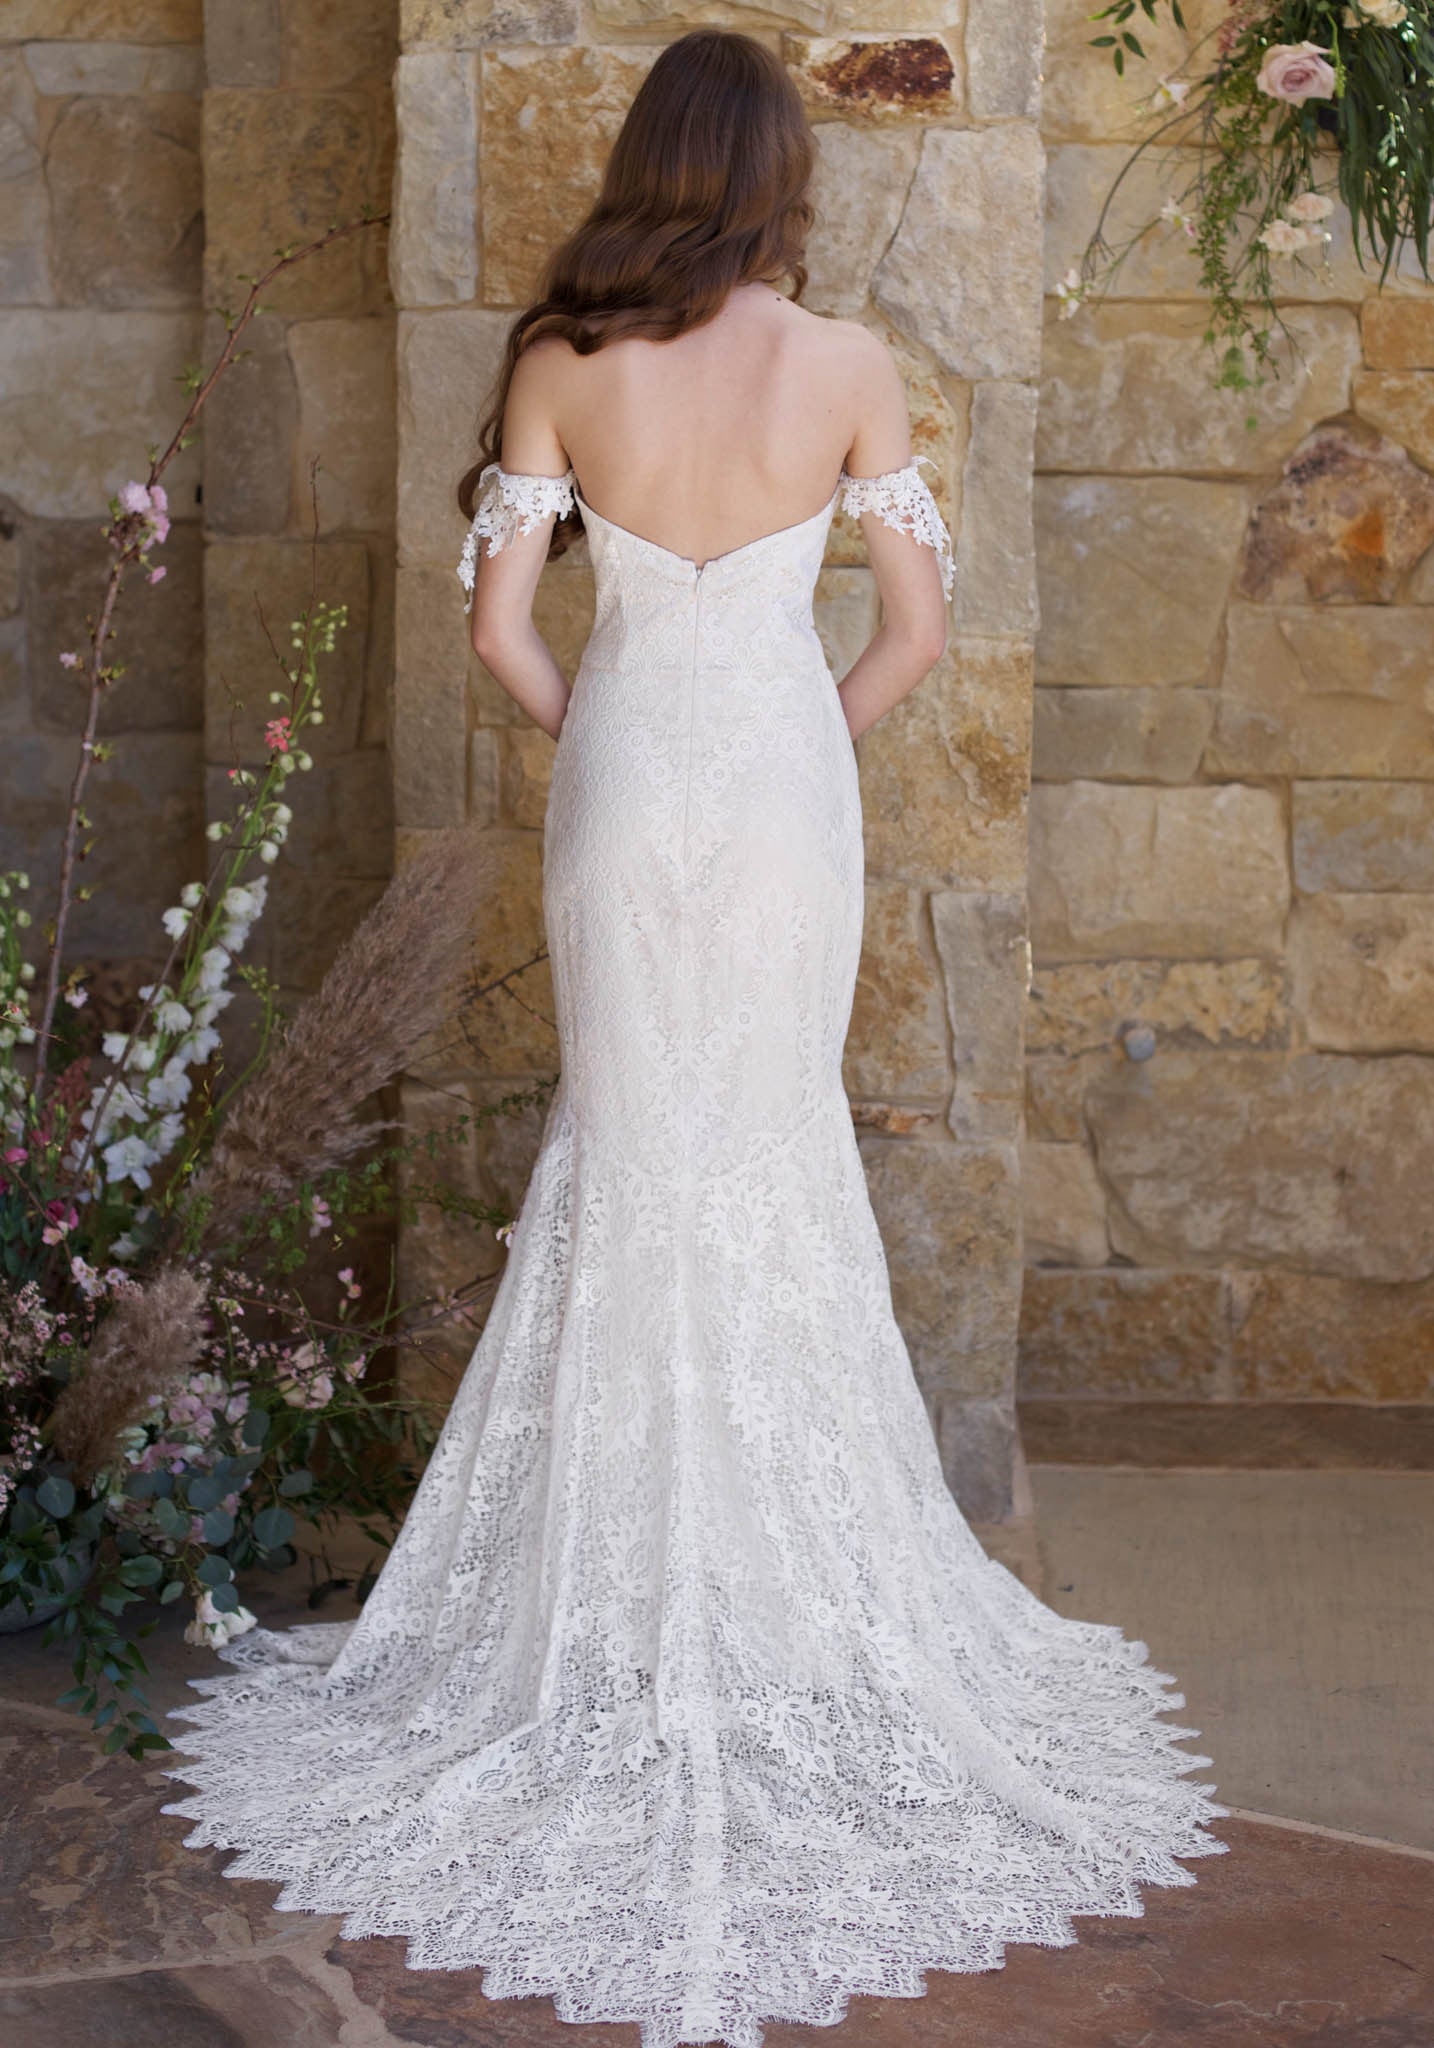 Thistledown Ethereal Bridal Gown with Silk Ribbons Claire Pettibone